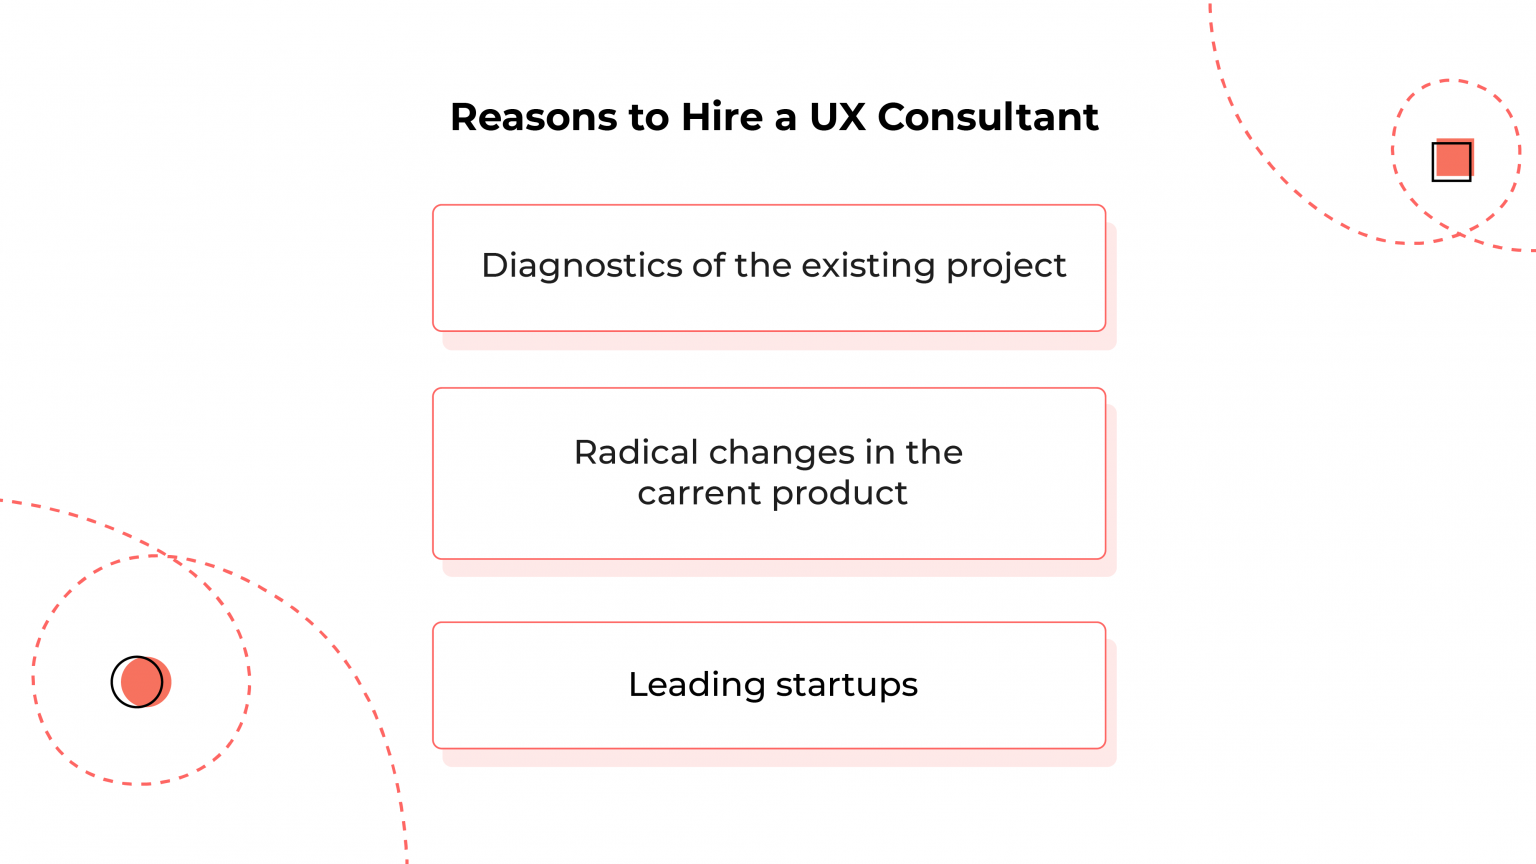 Main reasons to hire a UX consultant